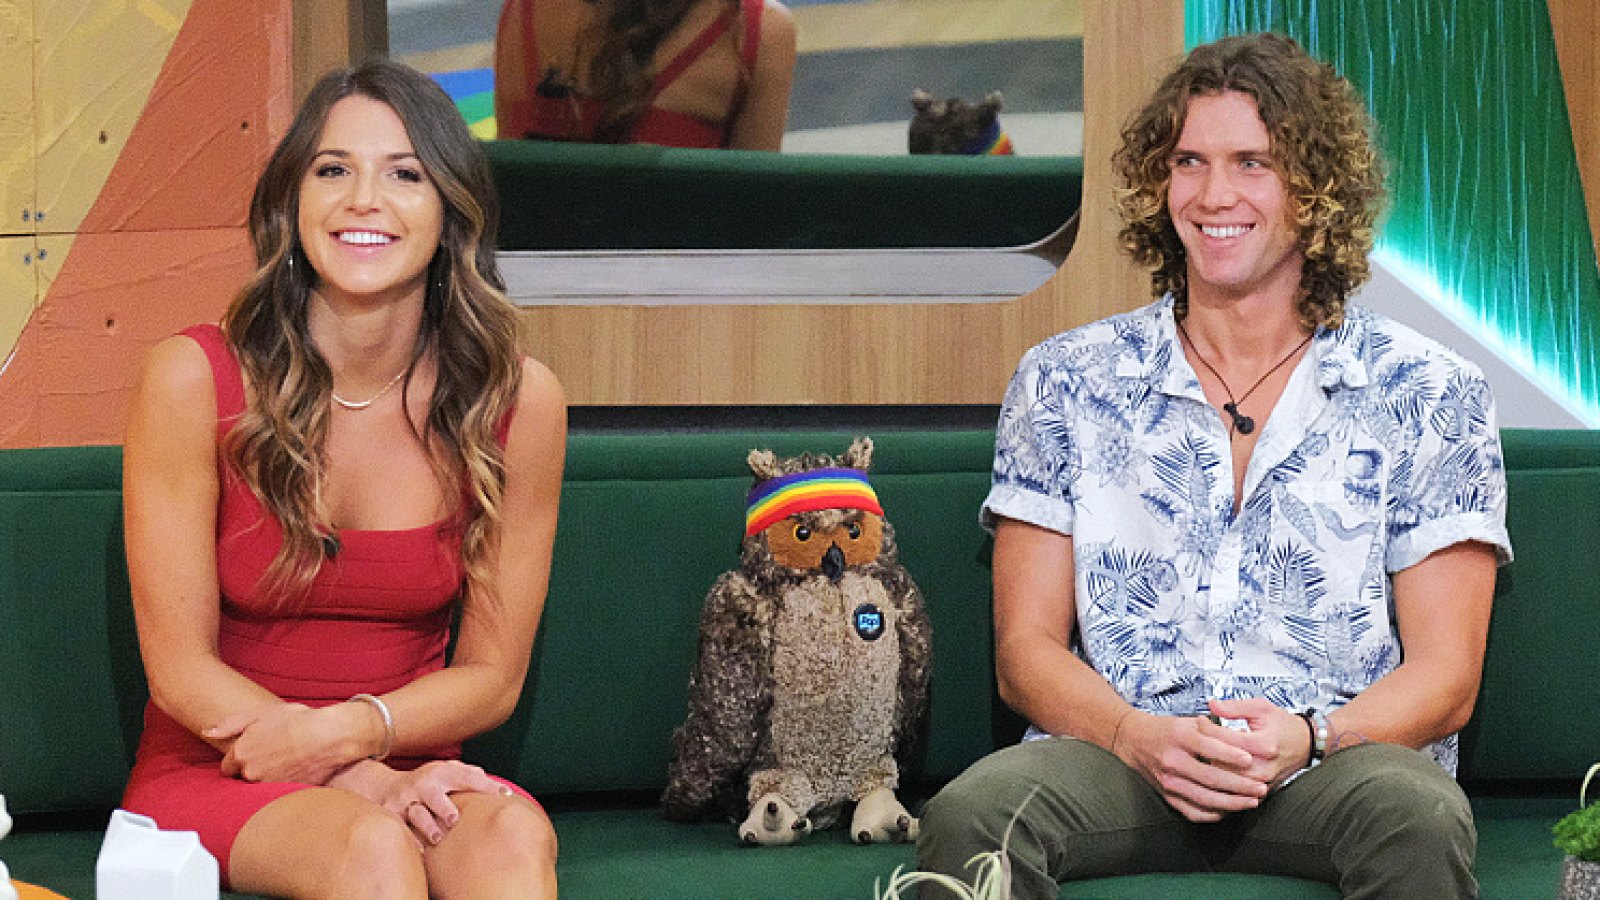 Big Brother Couple Angela Rummans and Tyler Crispen Are Moving in Together